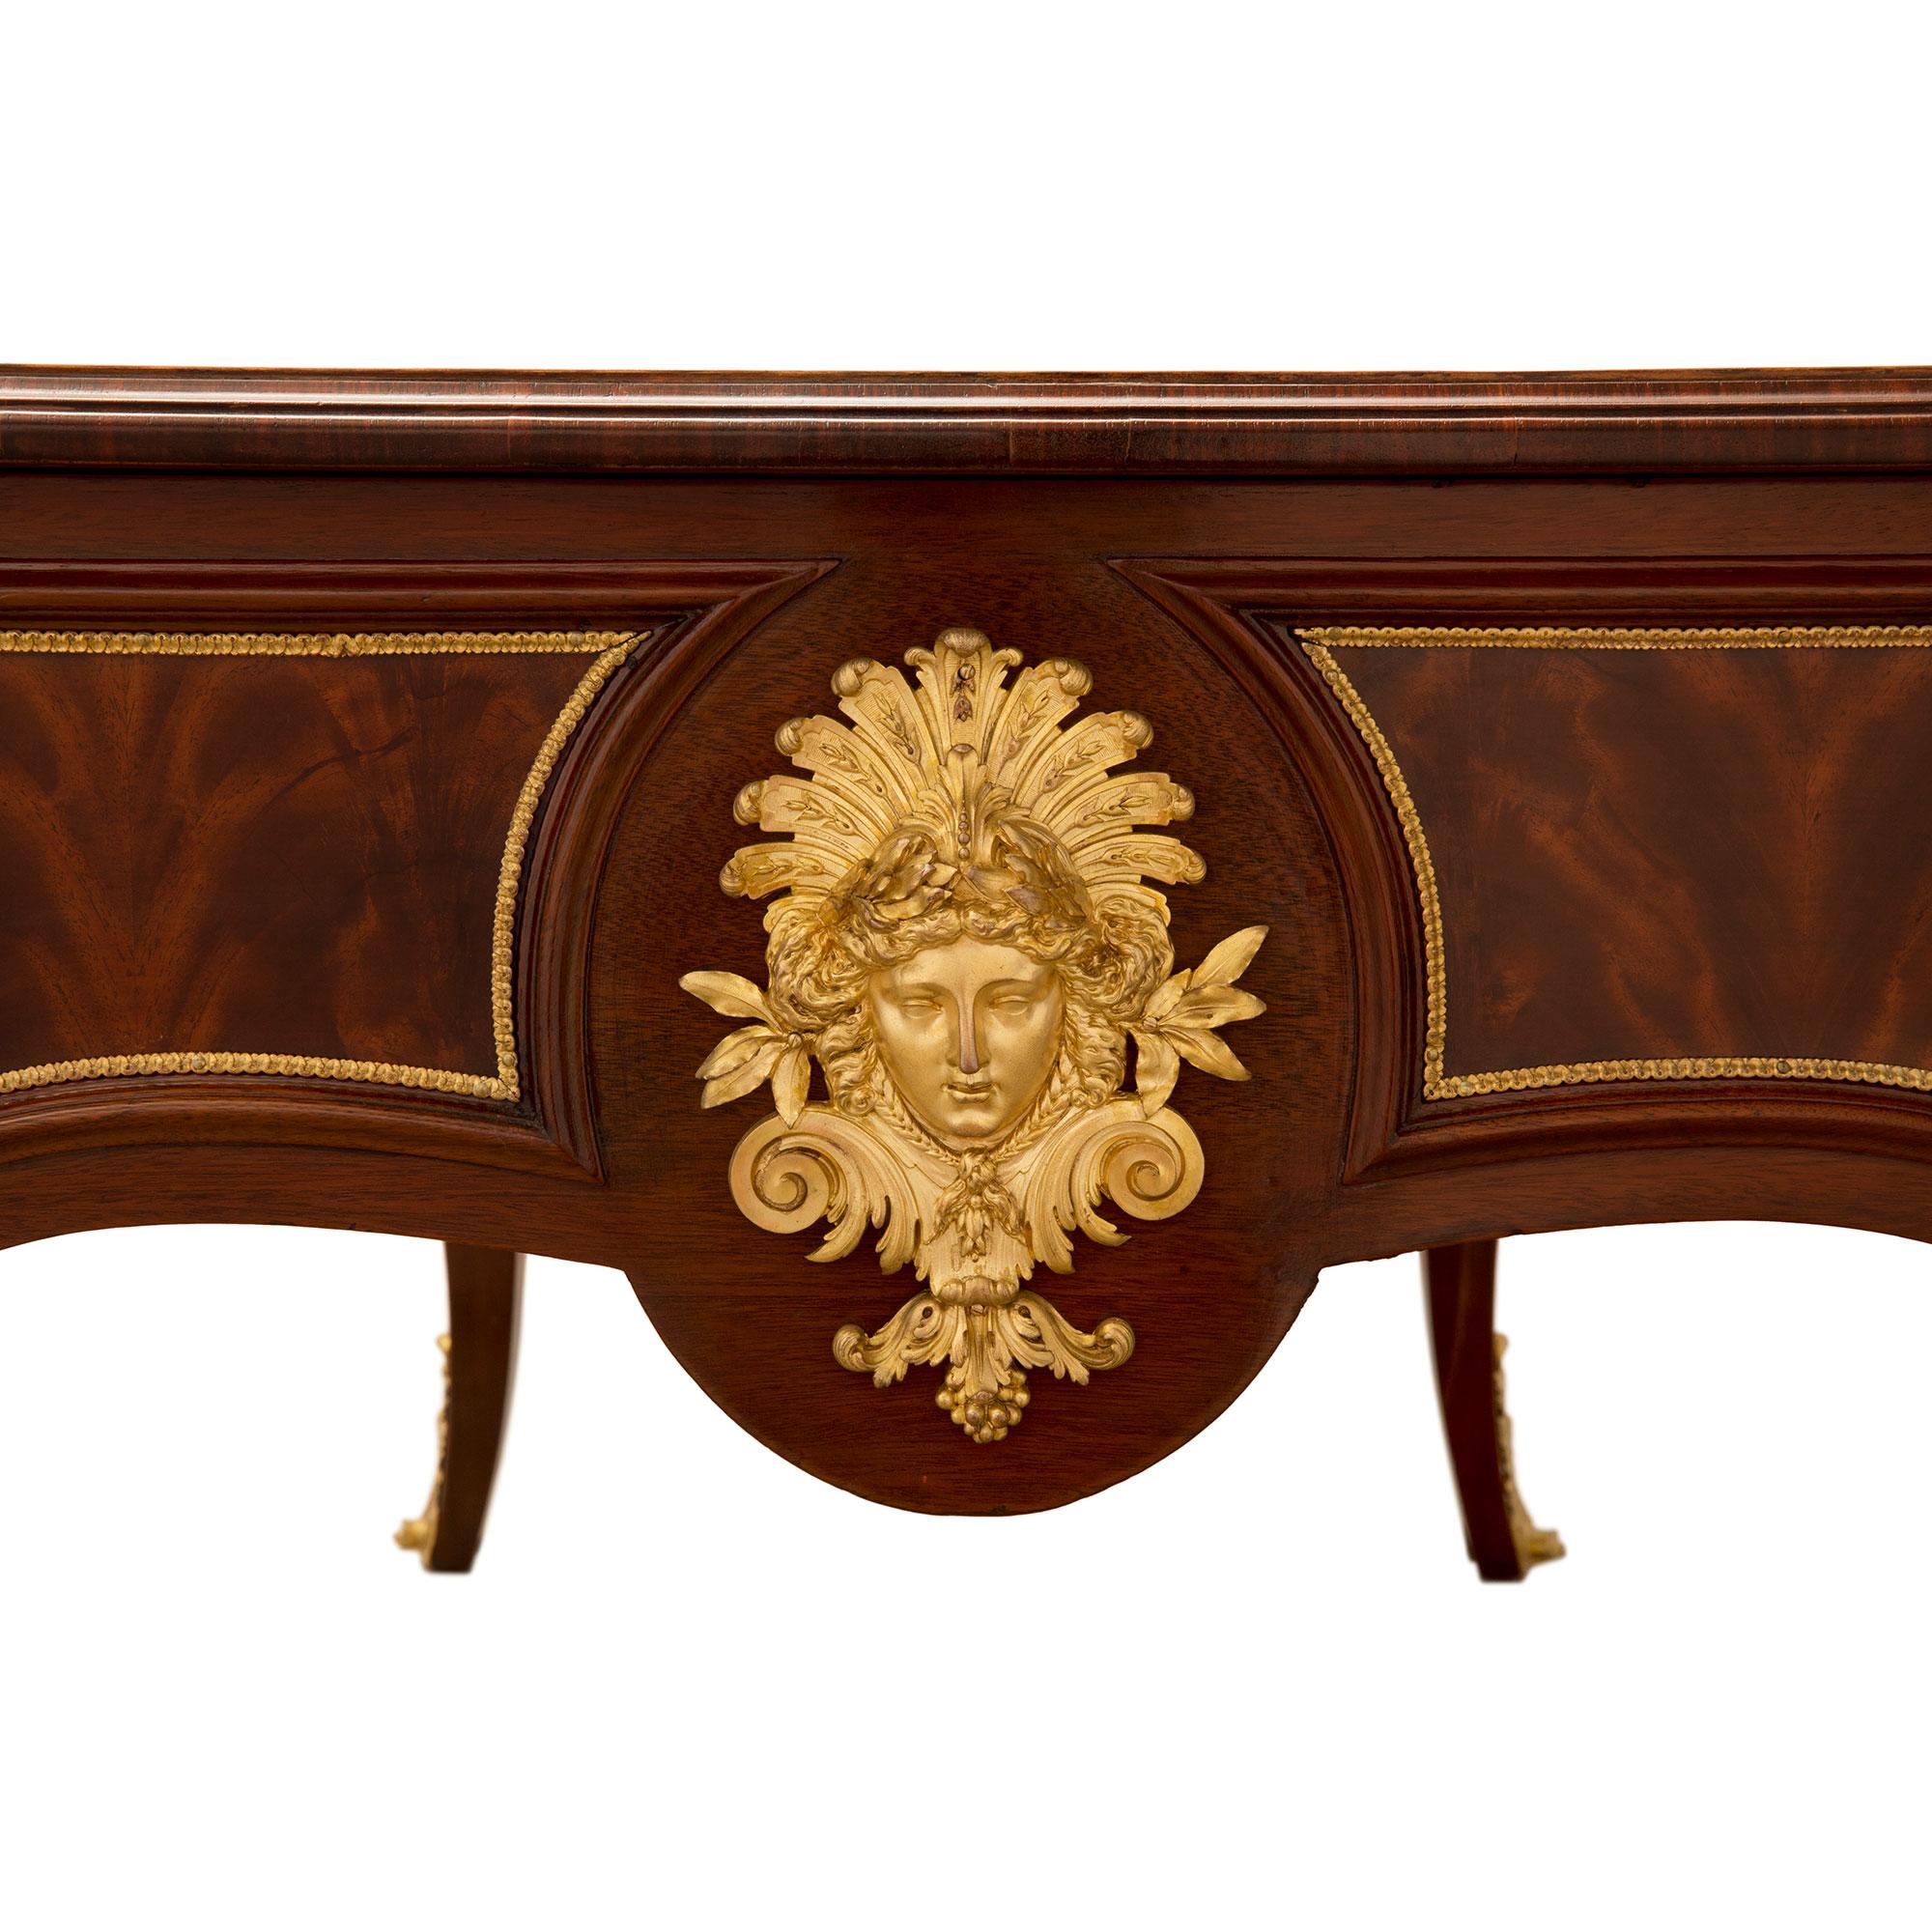 French 19th Century Louis XV Style Flamed Mahogany and Ormolu Bureau Plat Desk For Sale 5